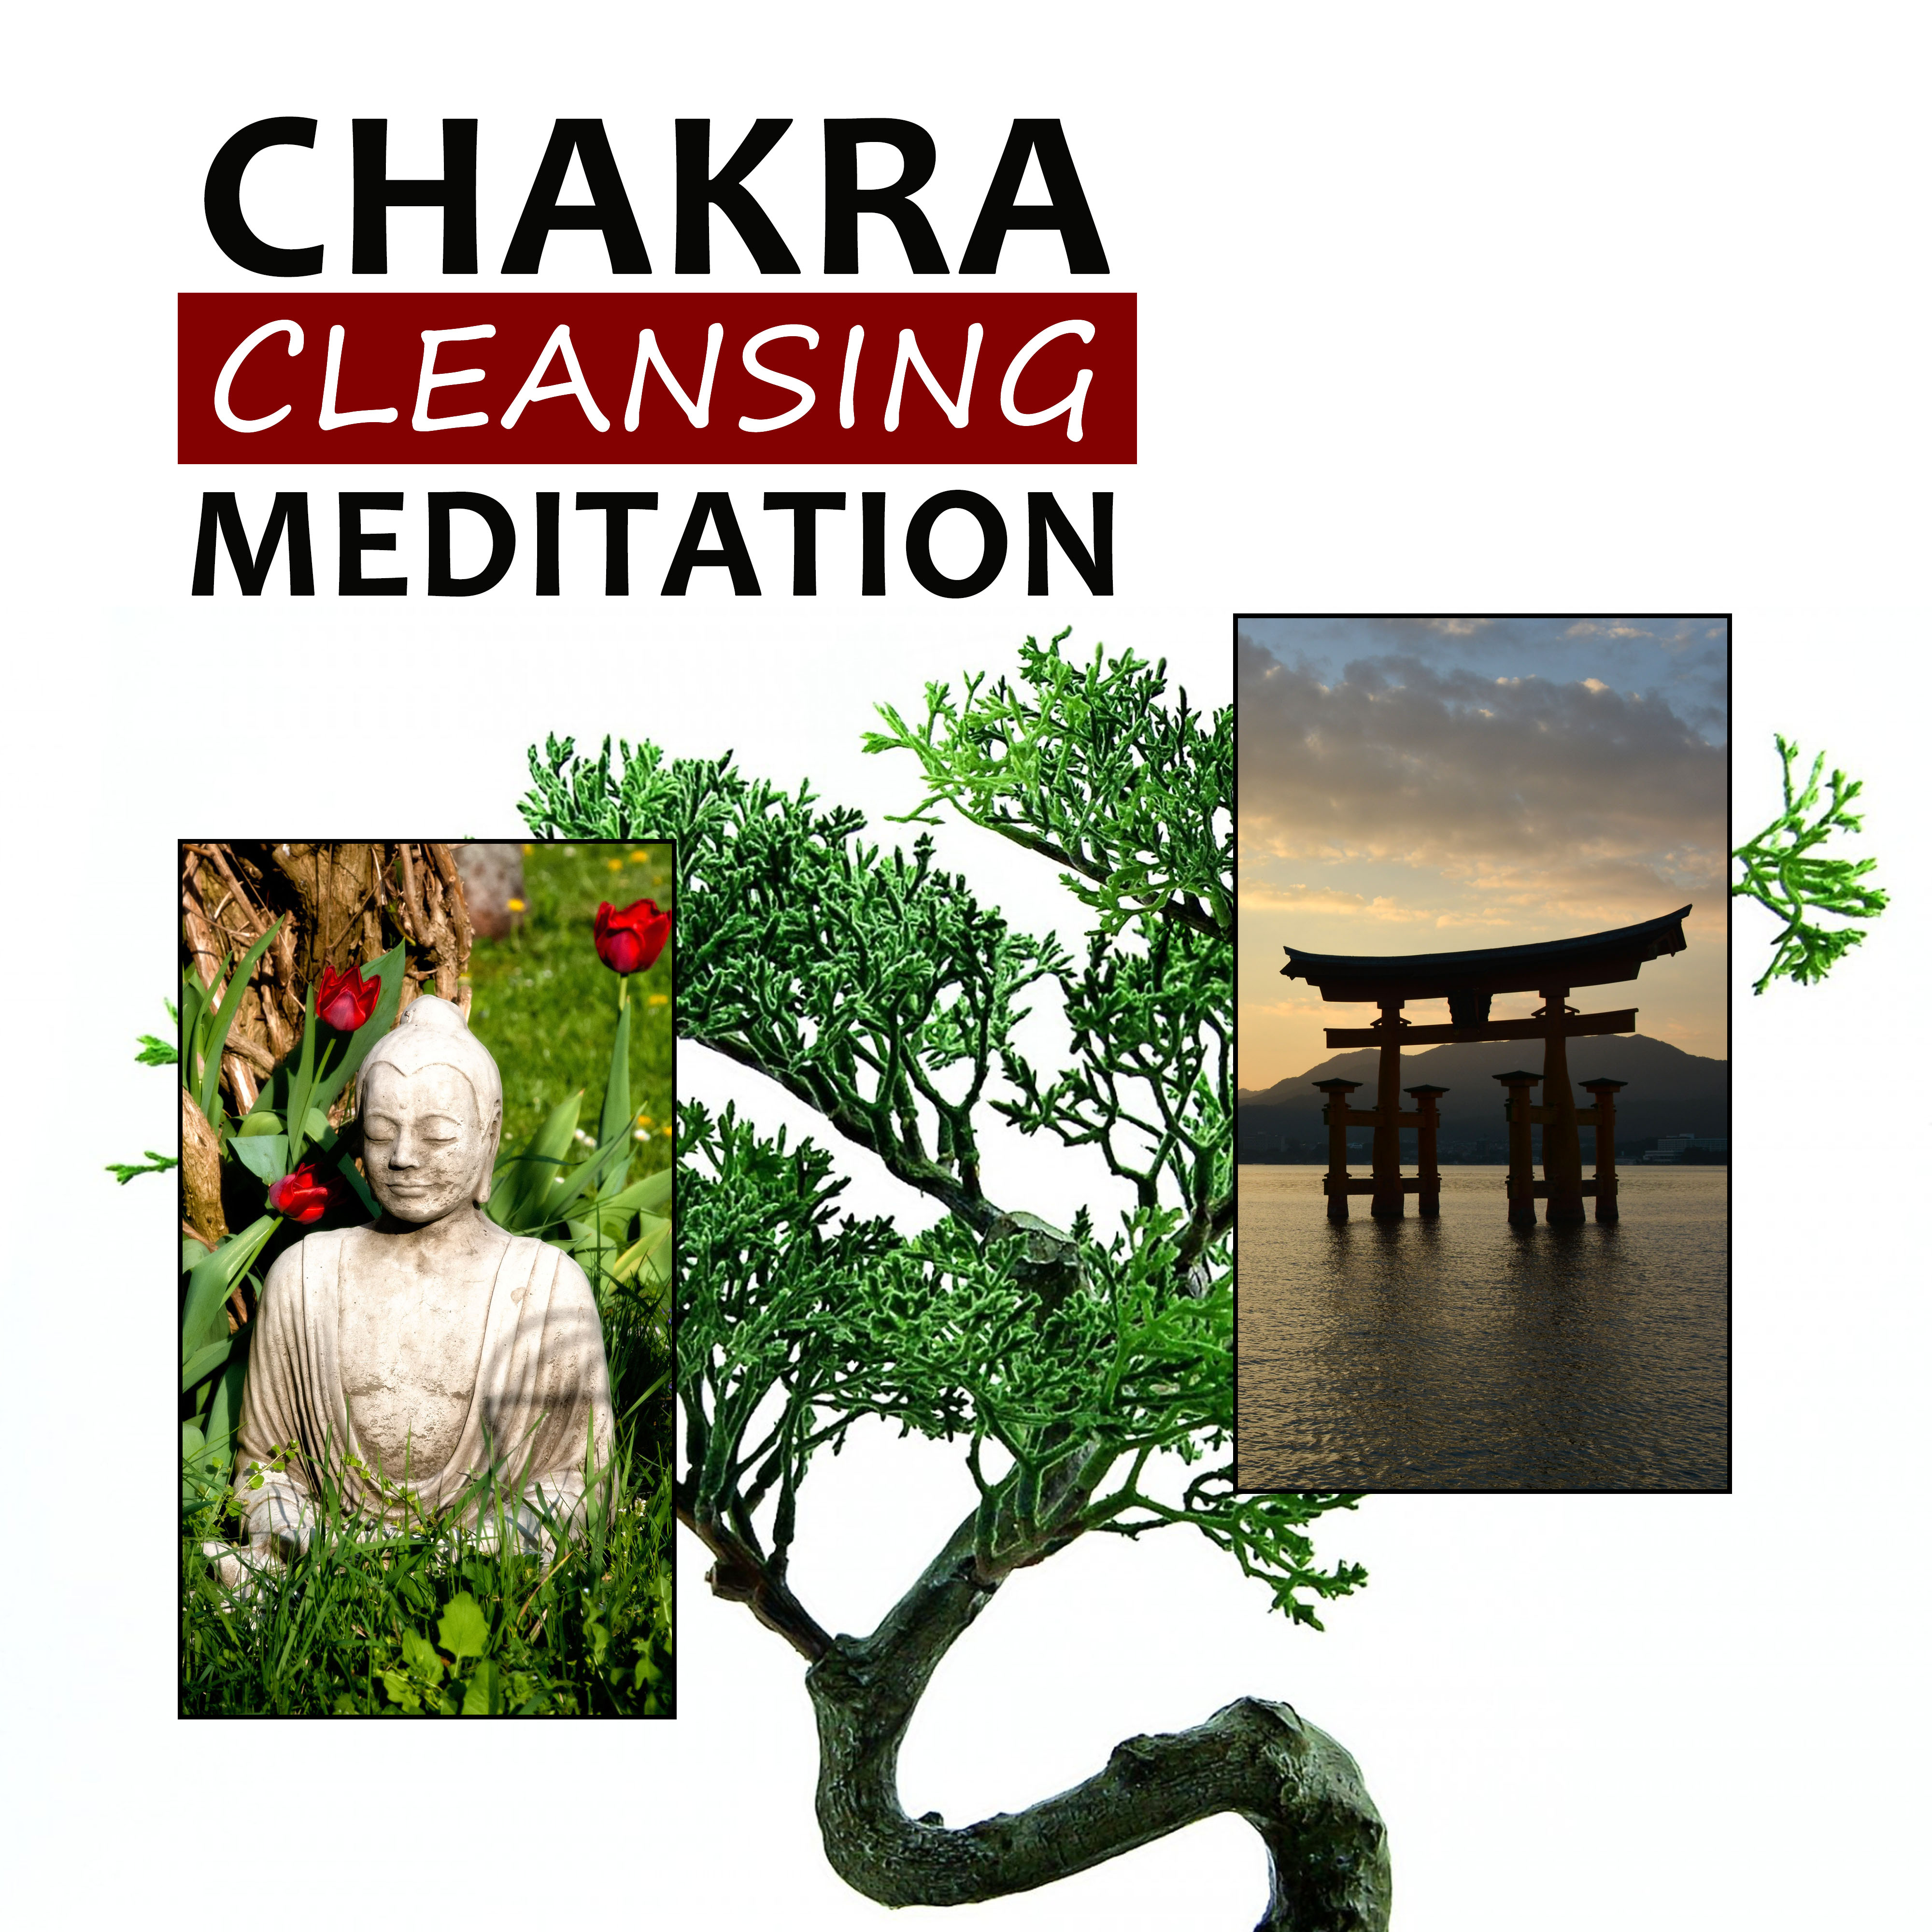 Chakra Cleansing Meditation  Calm Music for Meditation, Deep Nature Sounds, Om Chanting, Health Care, Sounds for Relax, Inner Peace